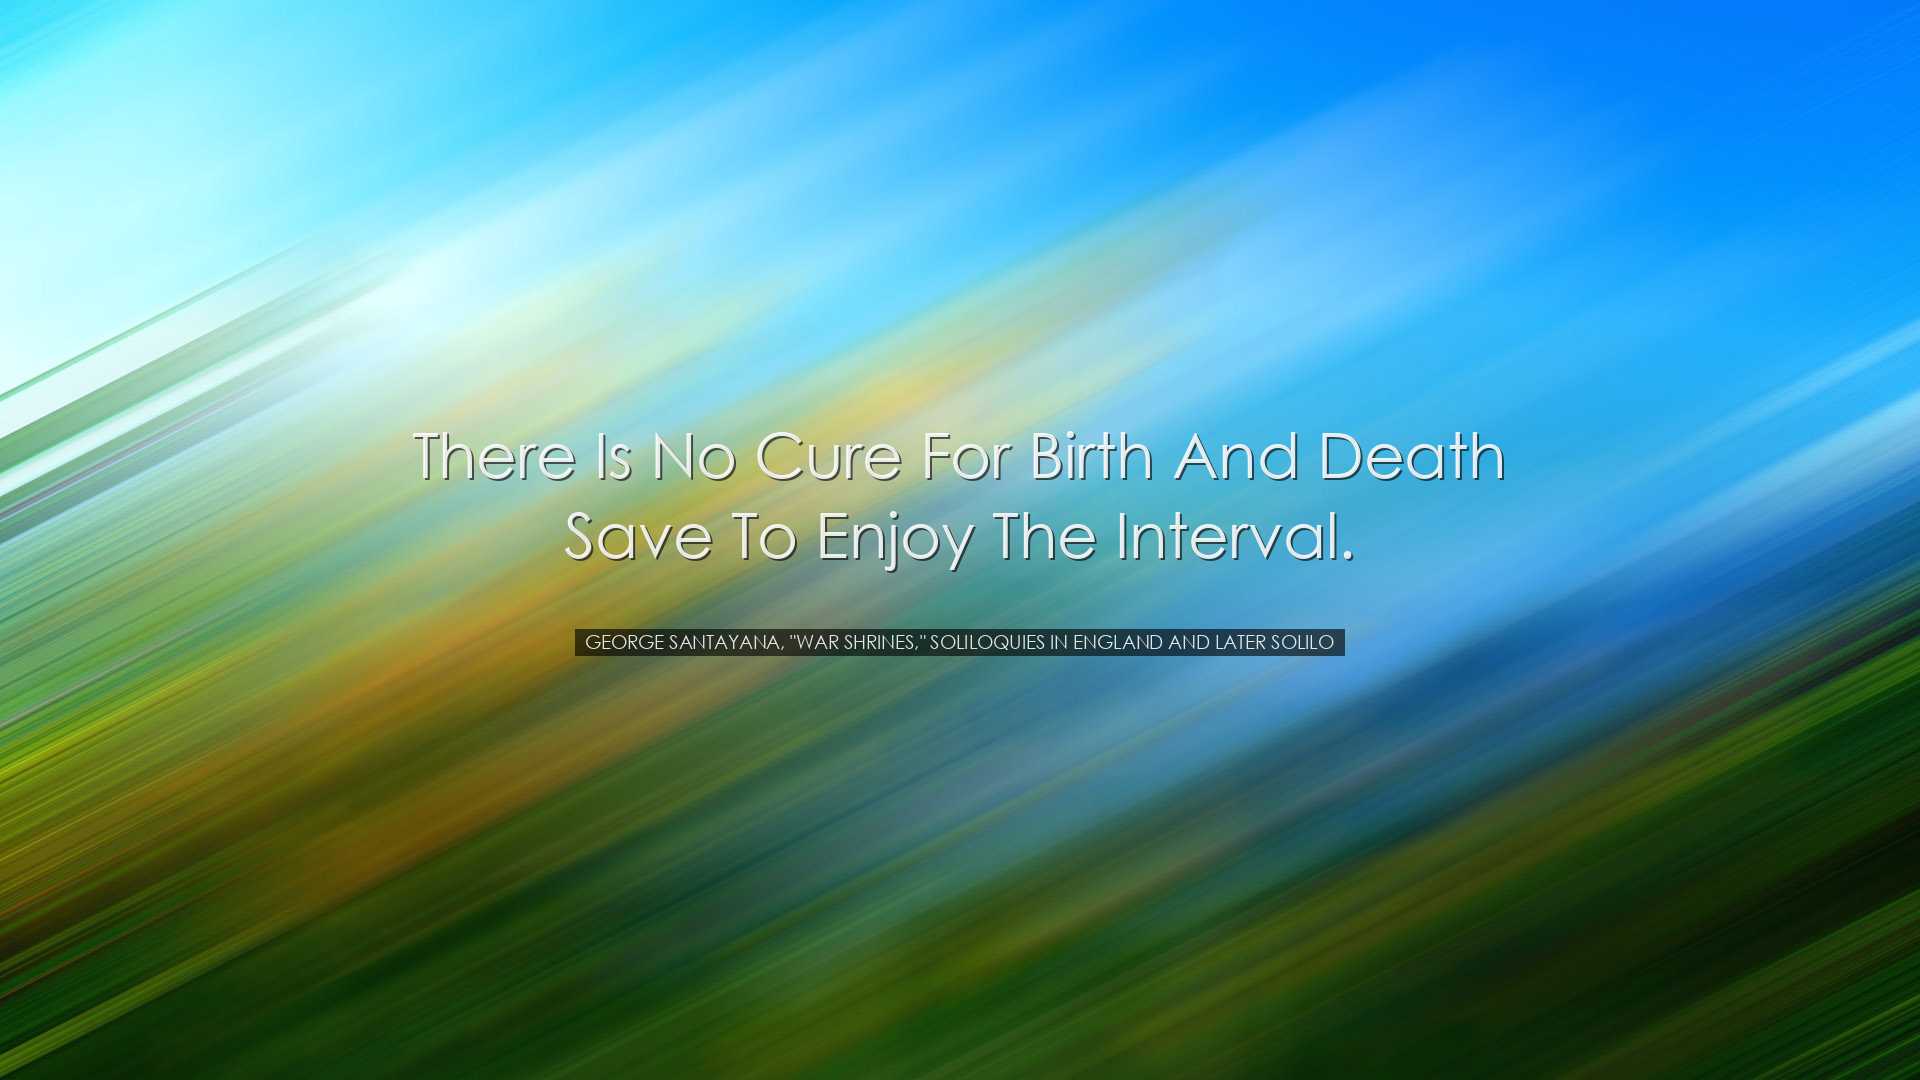 There is no cure for birth and death save to enjoy the interval. -